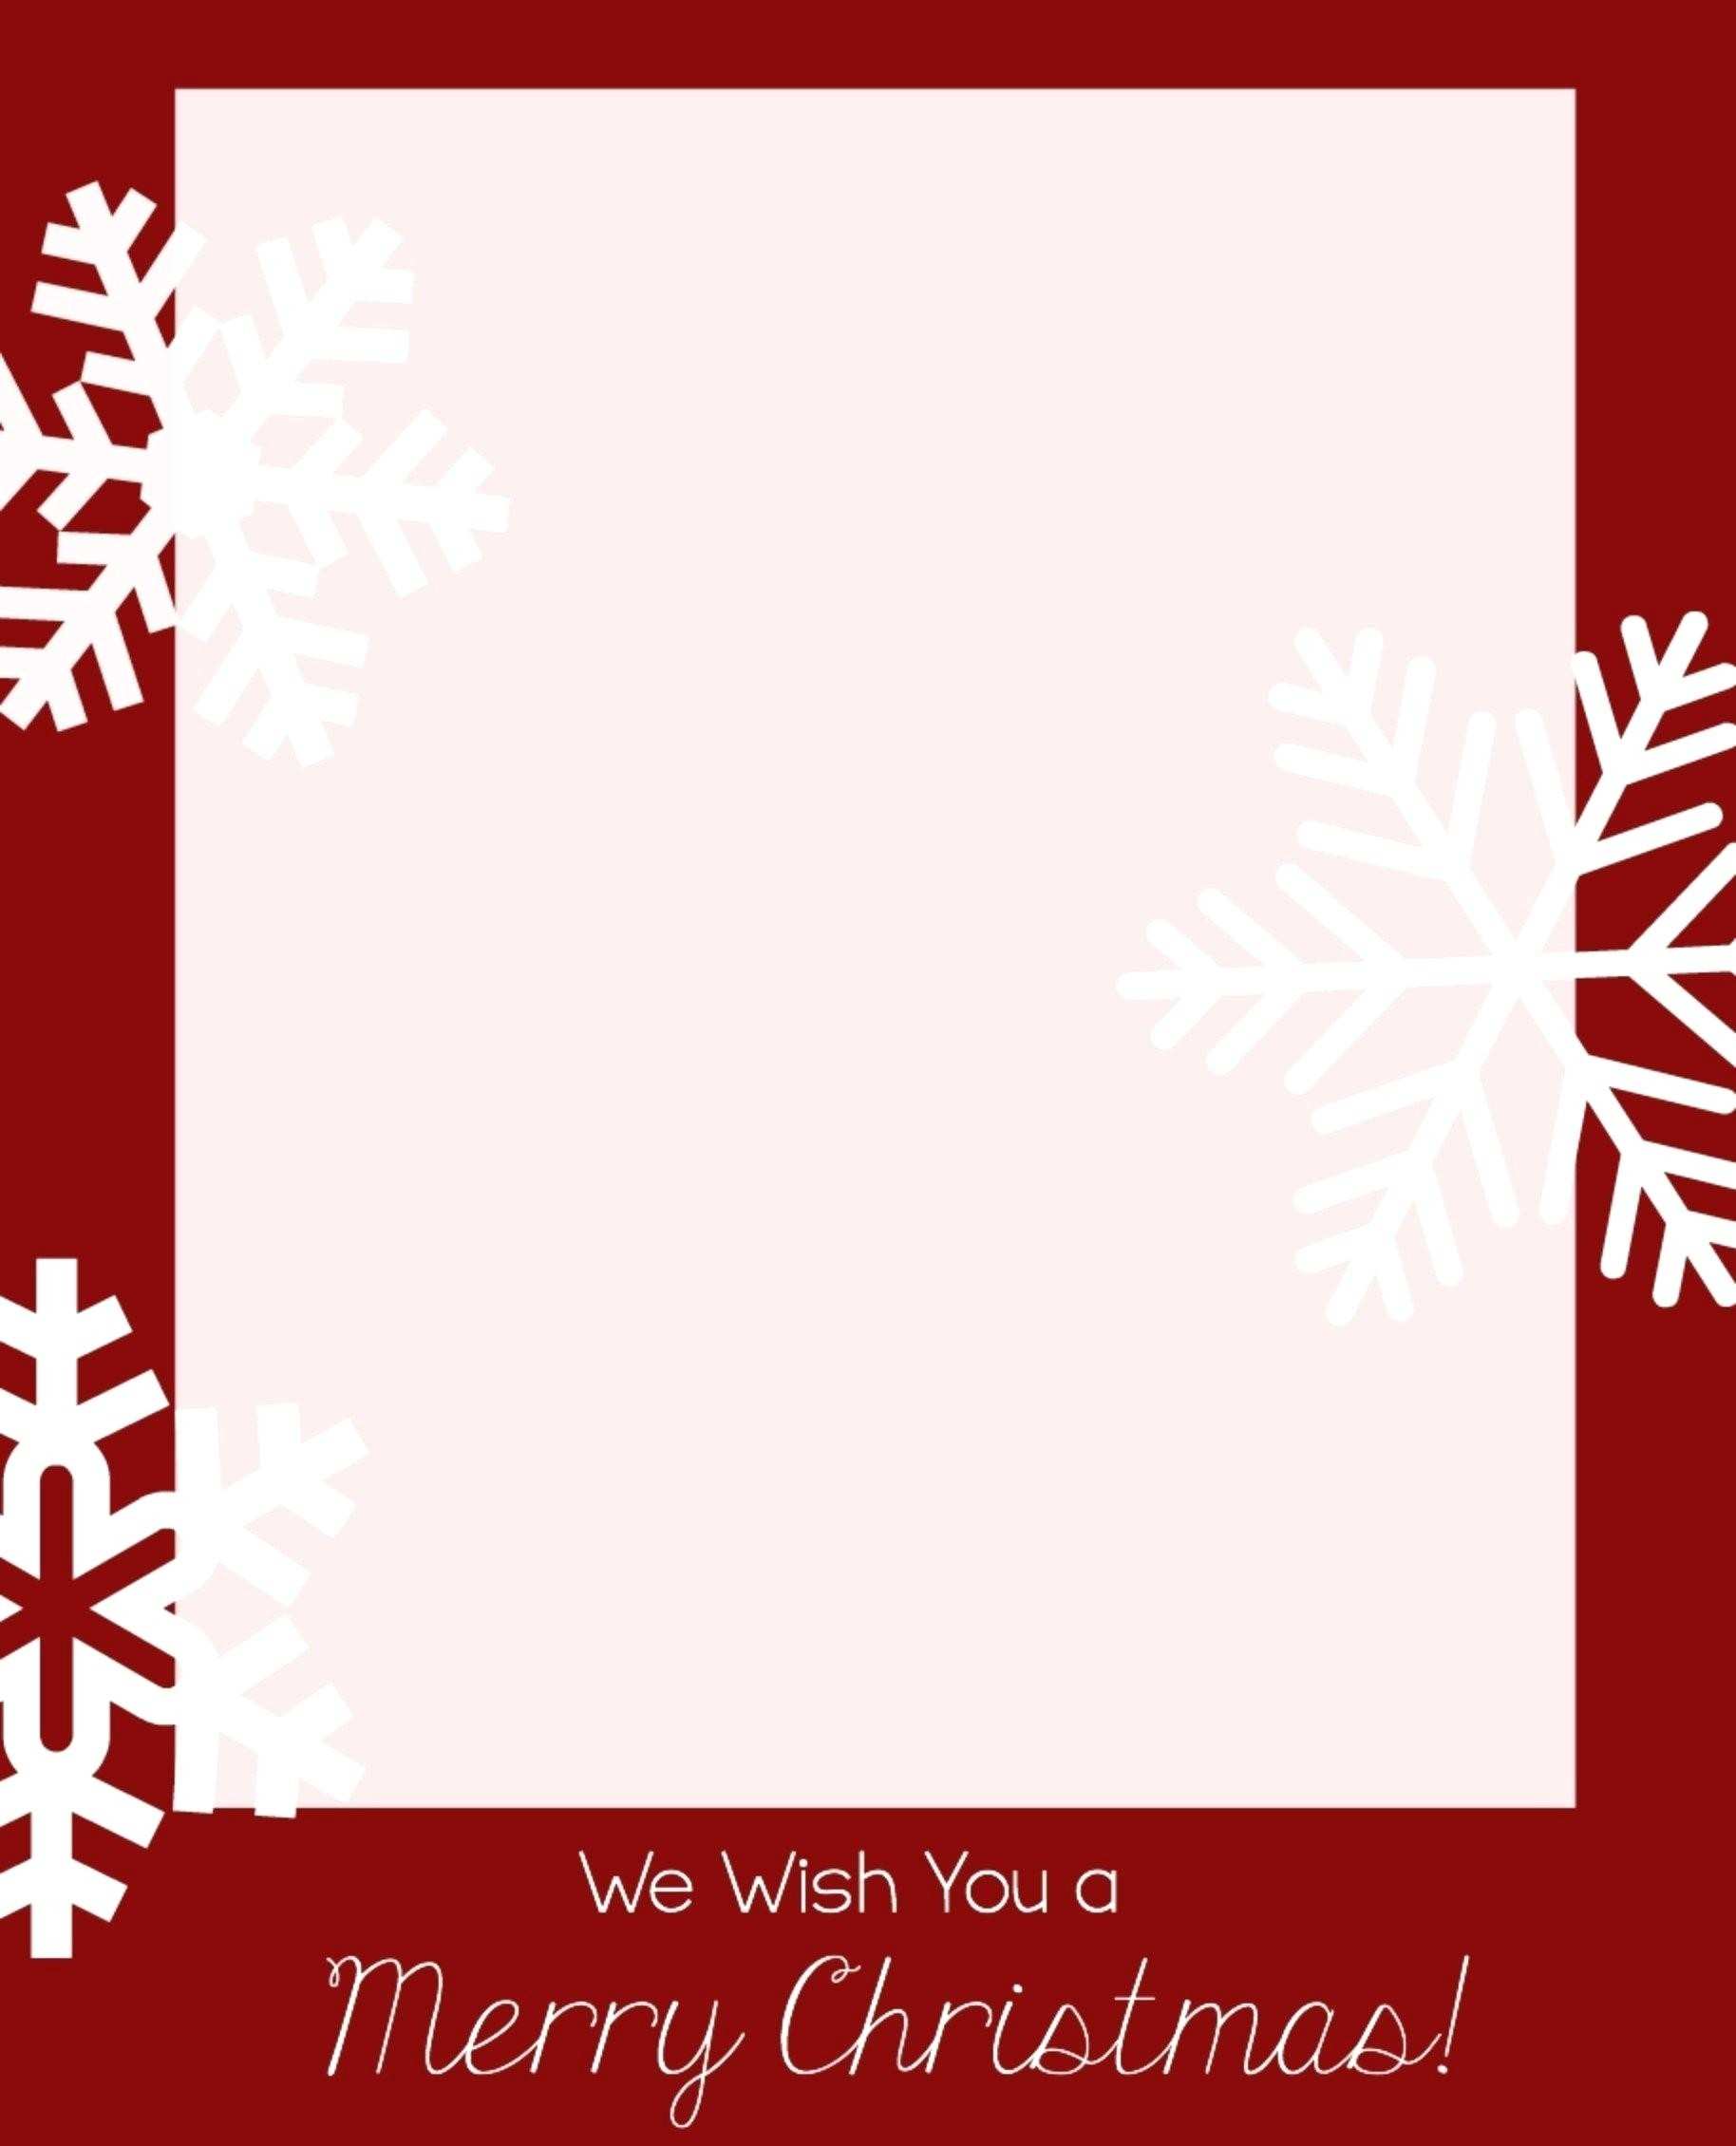 67 The Best Christmas Card Letter Templates PSD File by Christmas Card Letter Templates